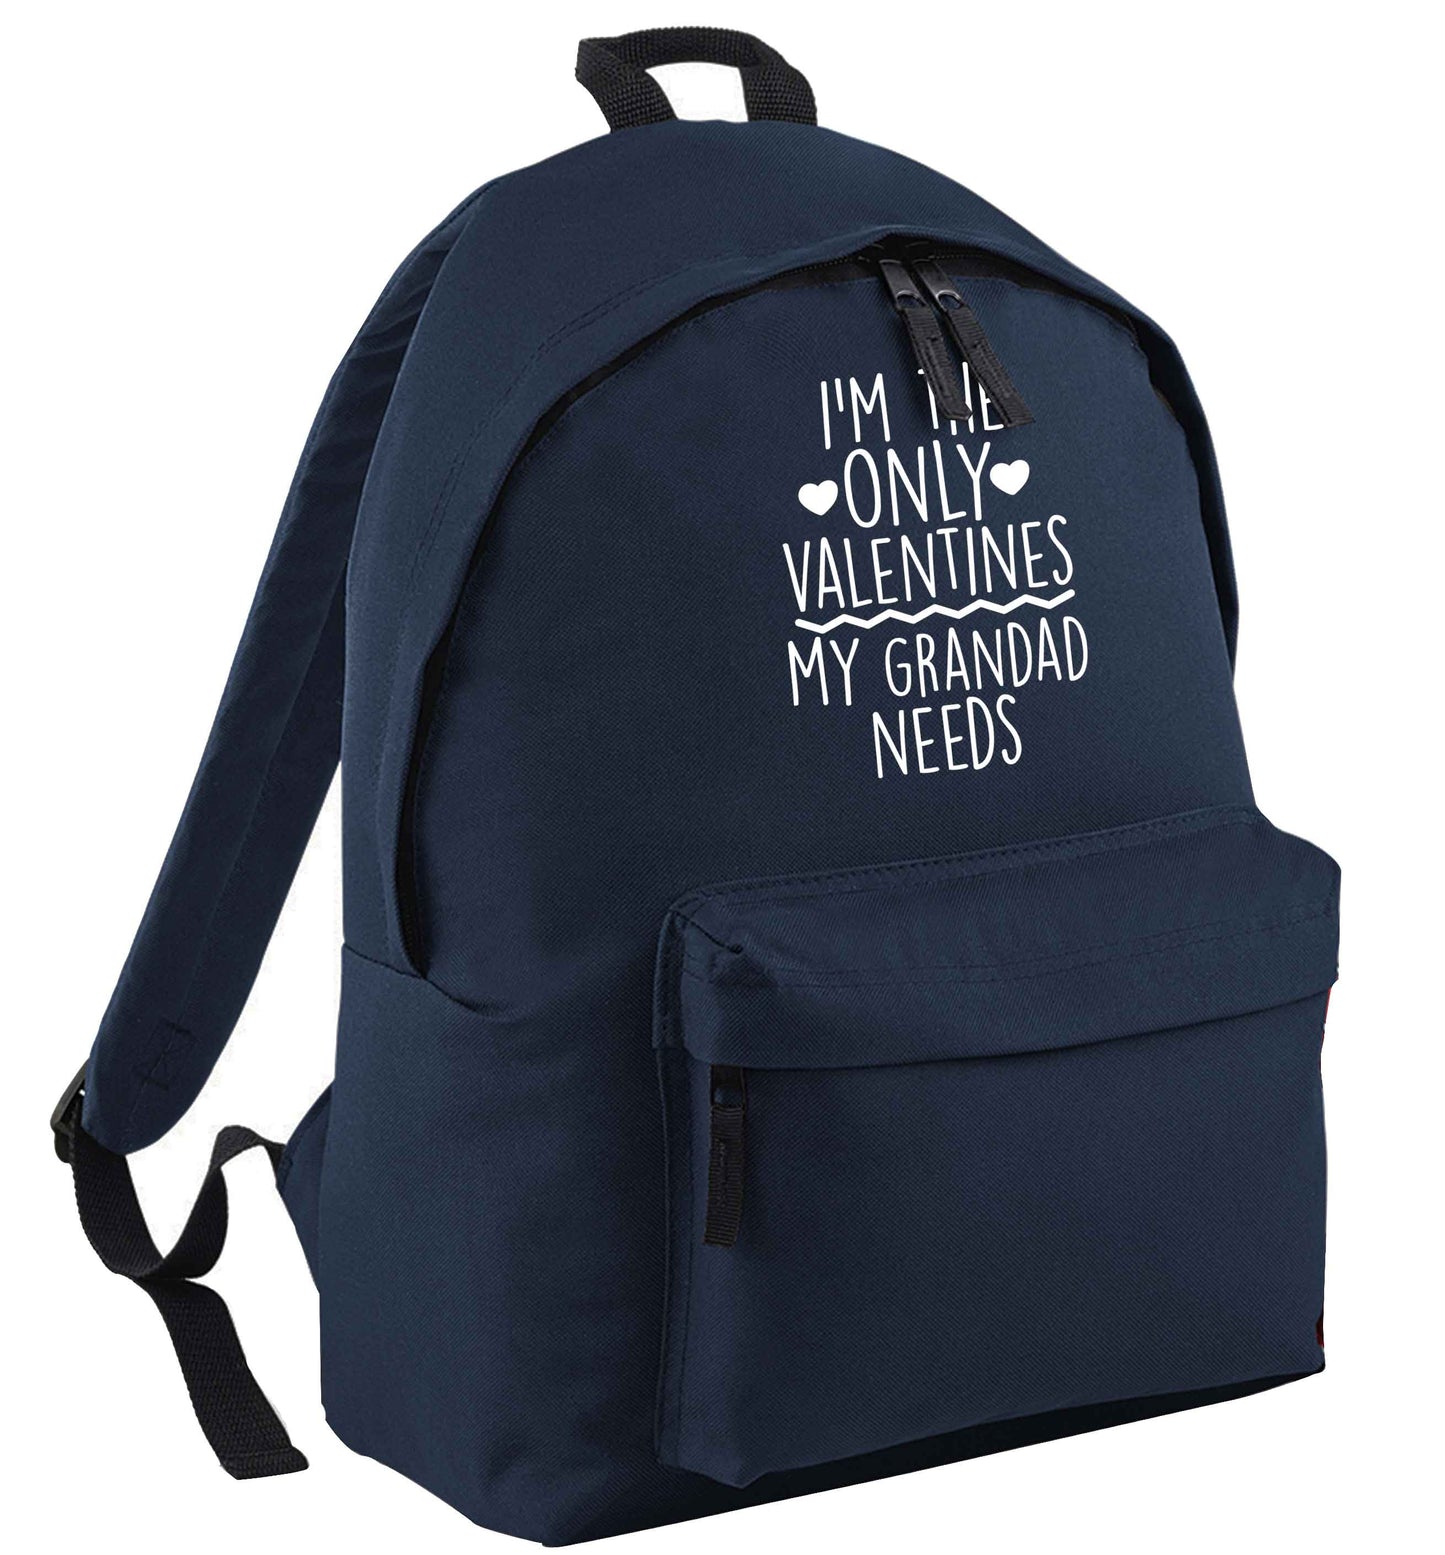 I'm the only valentines my grandad needs navy adults backpack